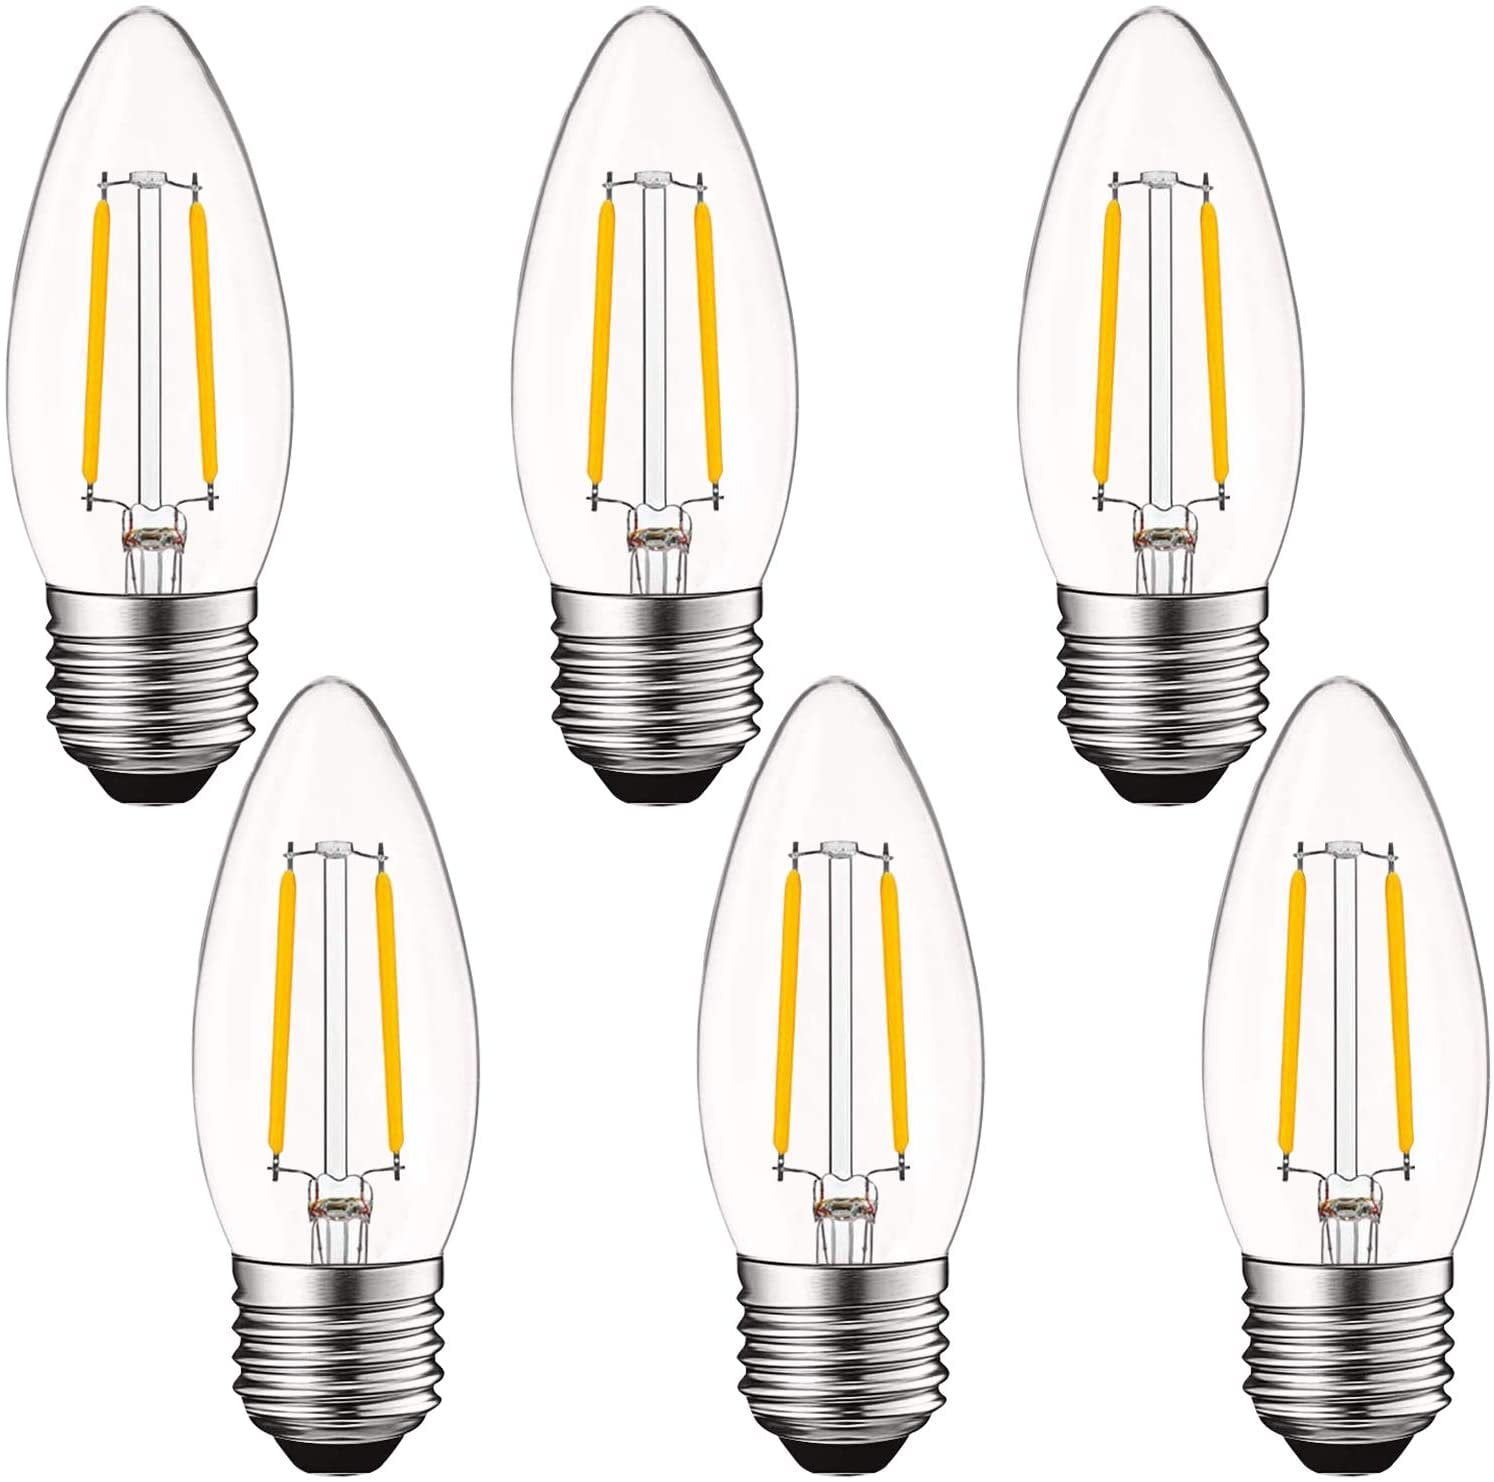 Cornwall as Gezondheid Luxrite LED Chandelier Light Bulbs, 4W=40W, 2700K Warm White, Dimmable,  Torpedo Tip Clear Glass, E26, 400 Lumens, UL Listed 6Pack - Walmart.com